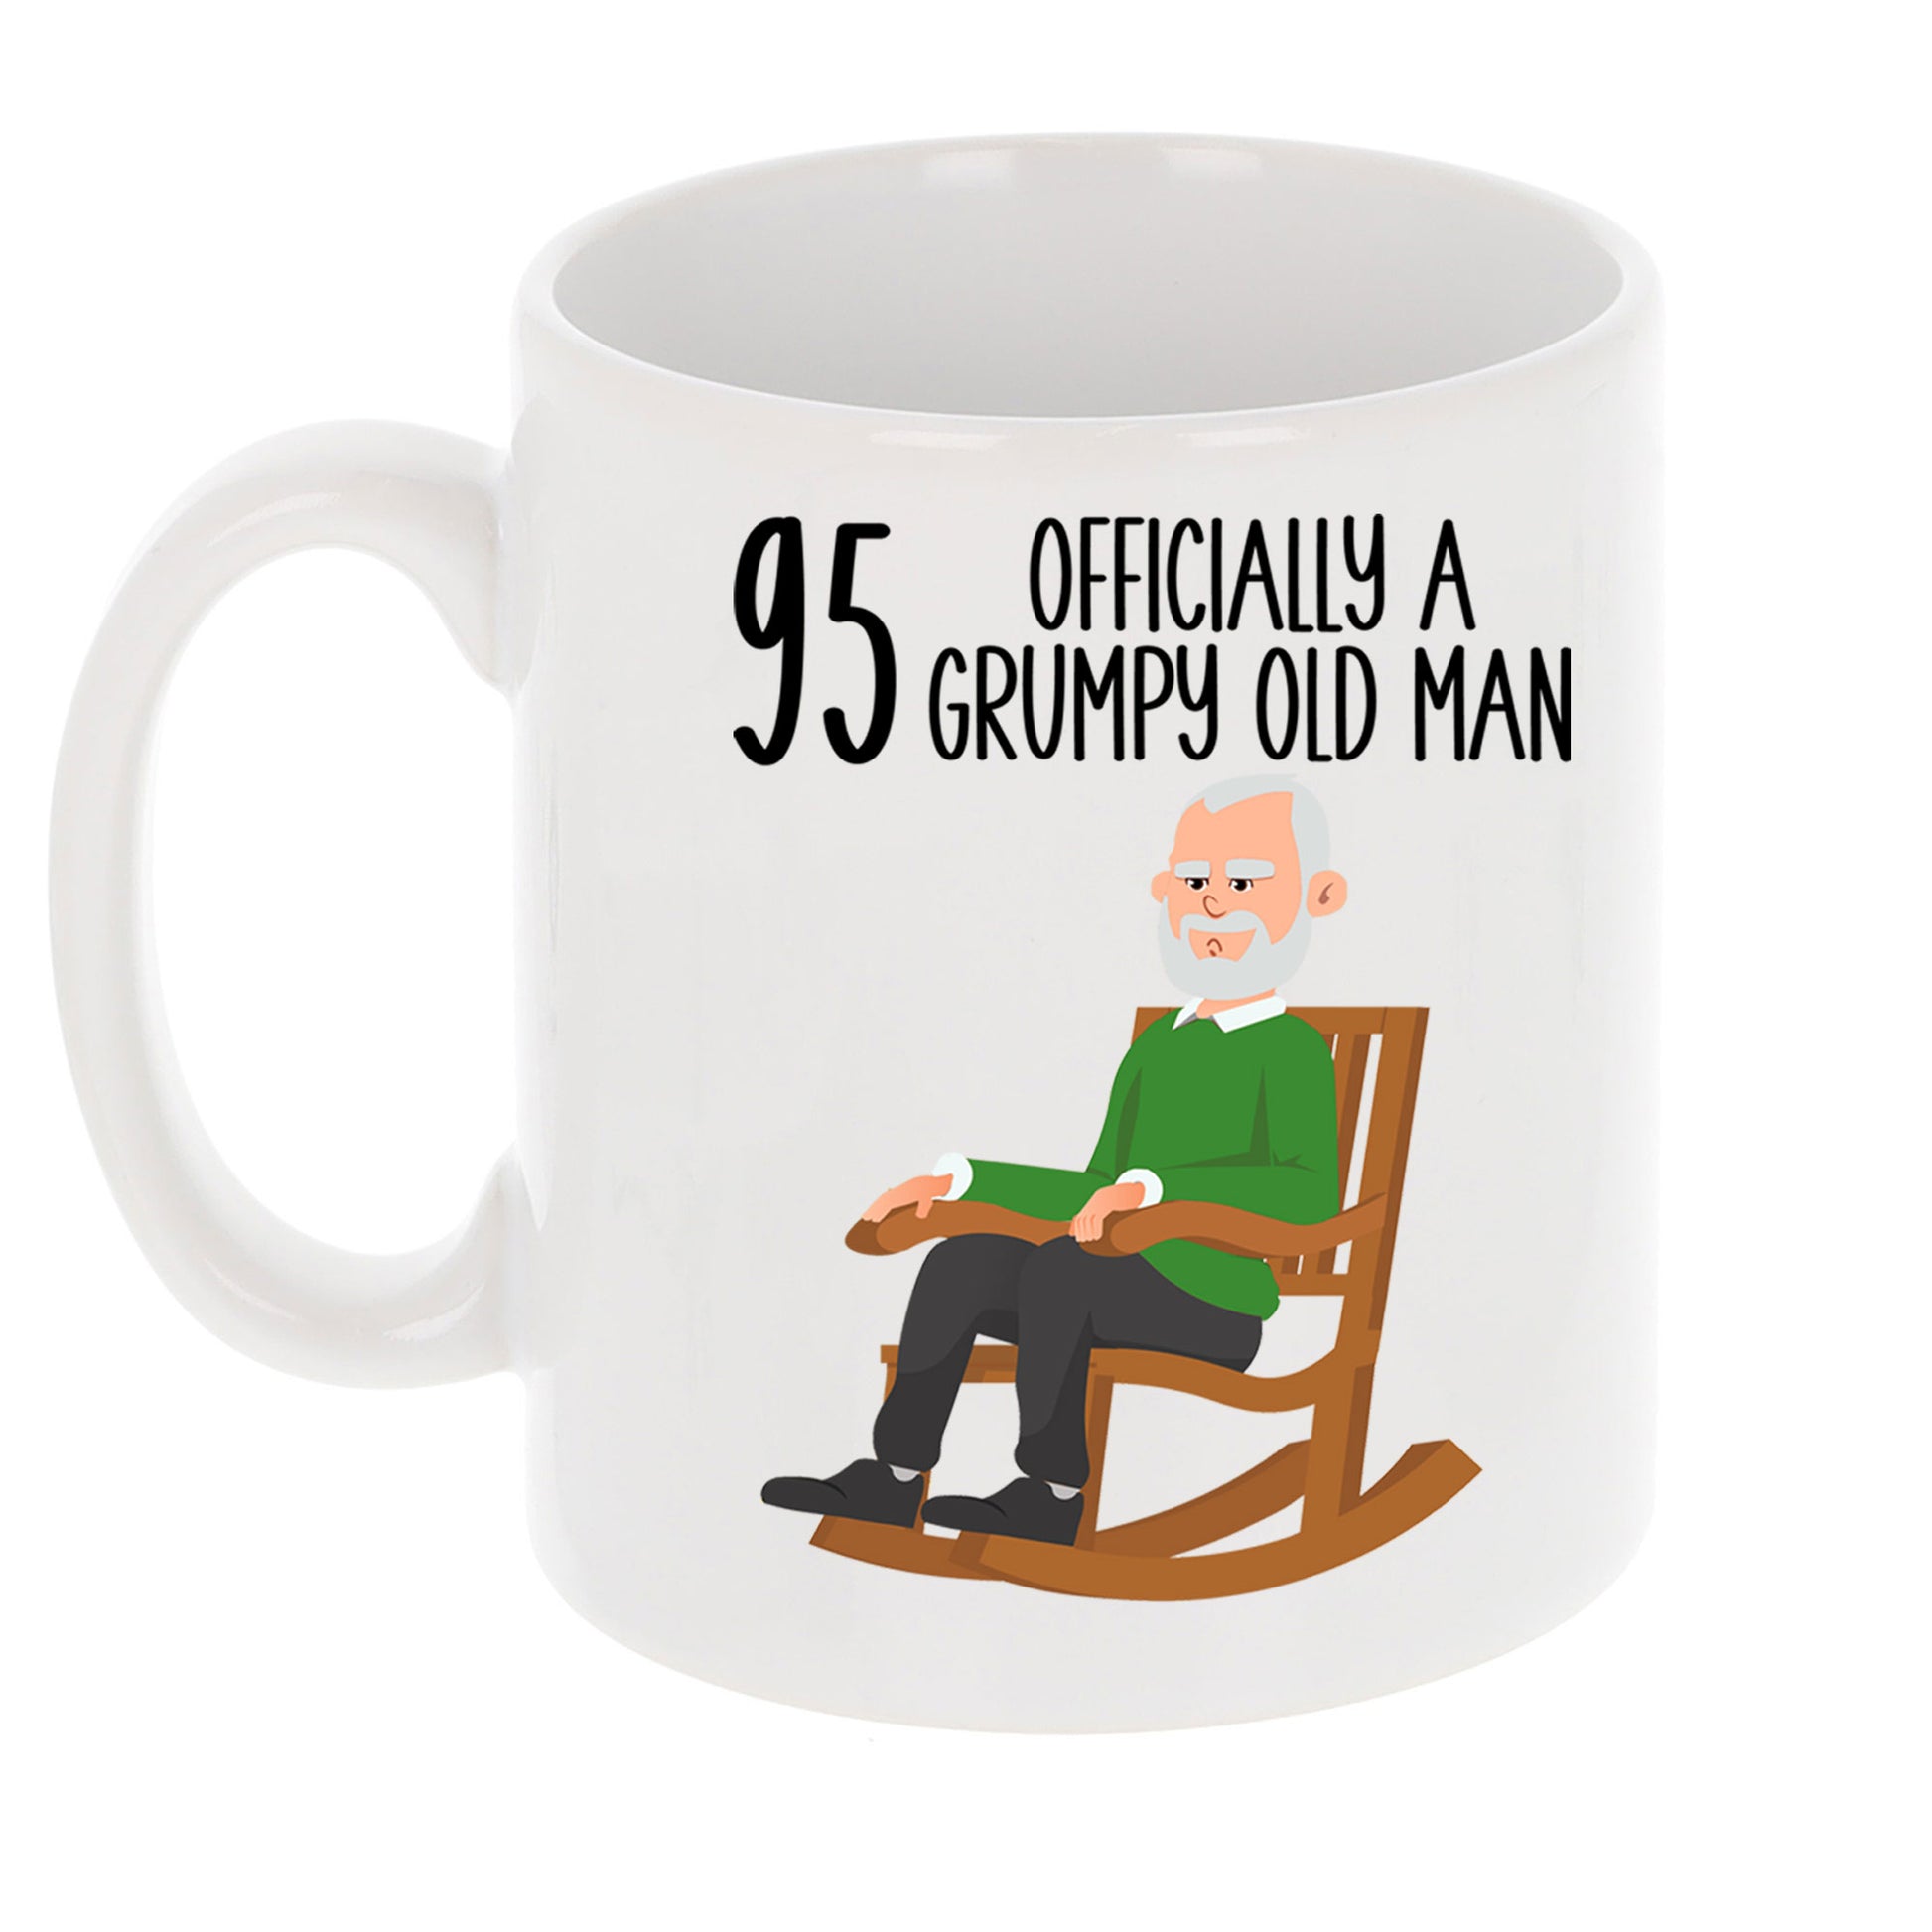 95th Officially A Grumpy Old Man Mug and/or Coaster Gift  - Always Looking Good - Mug On Its Own  